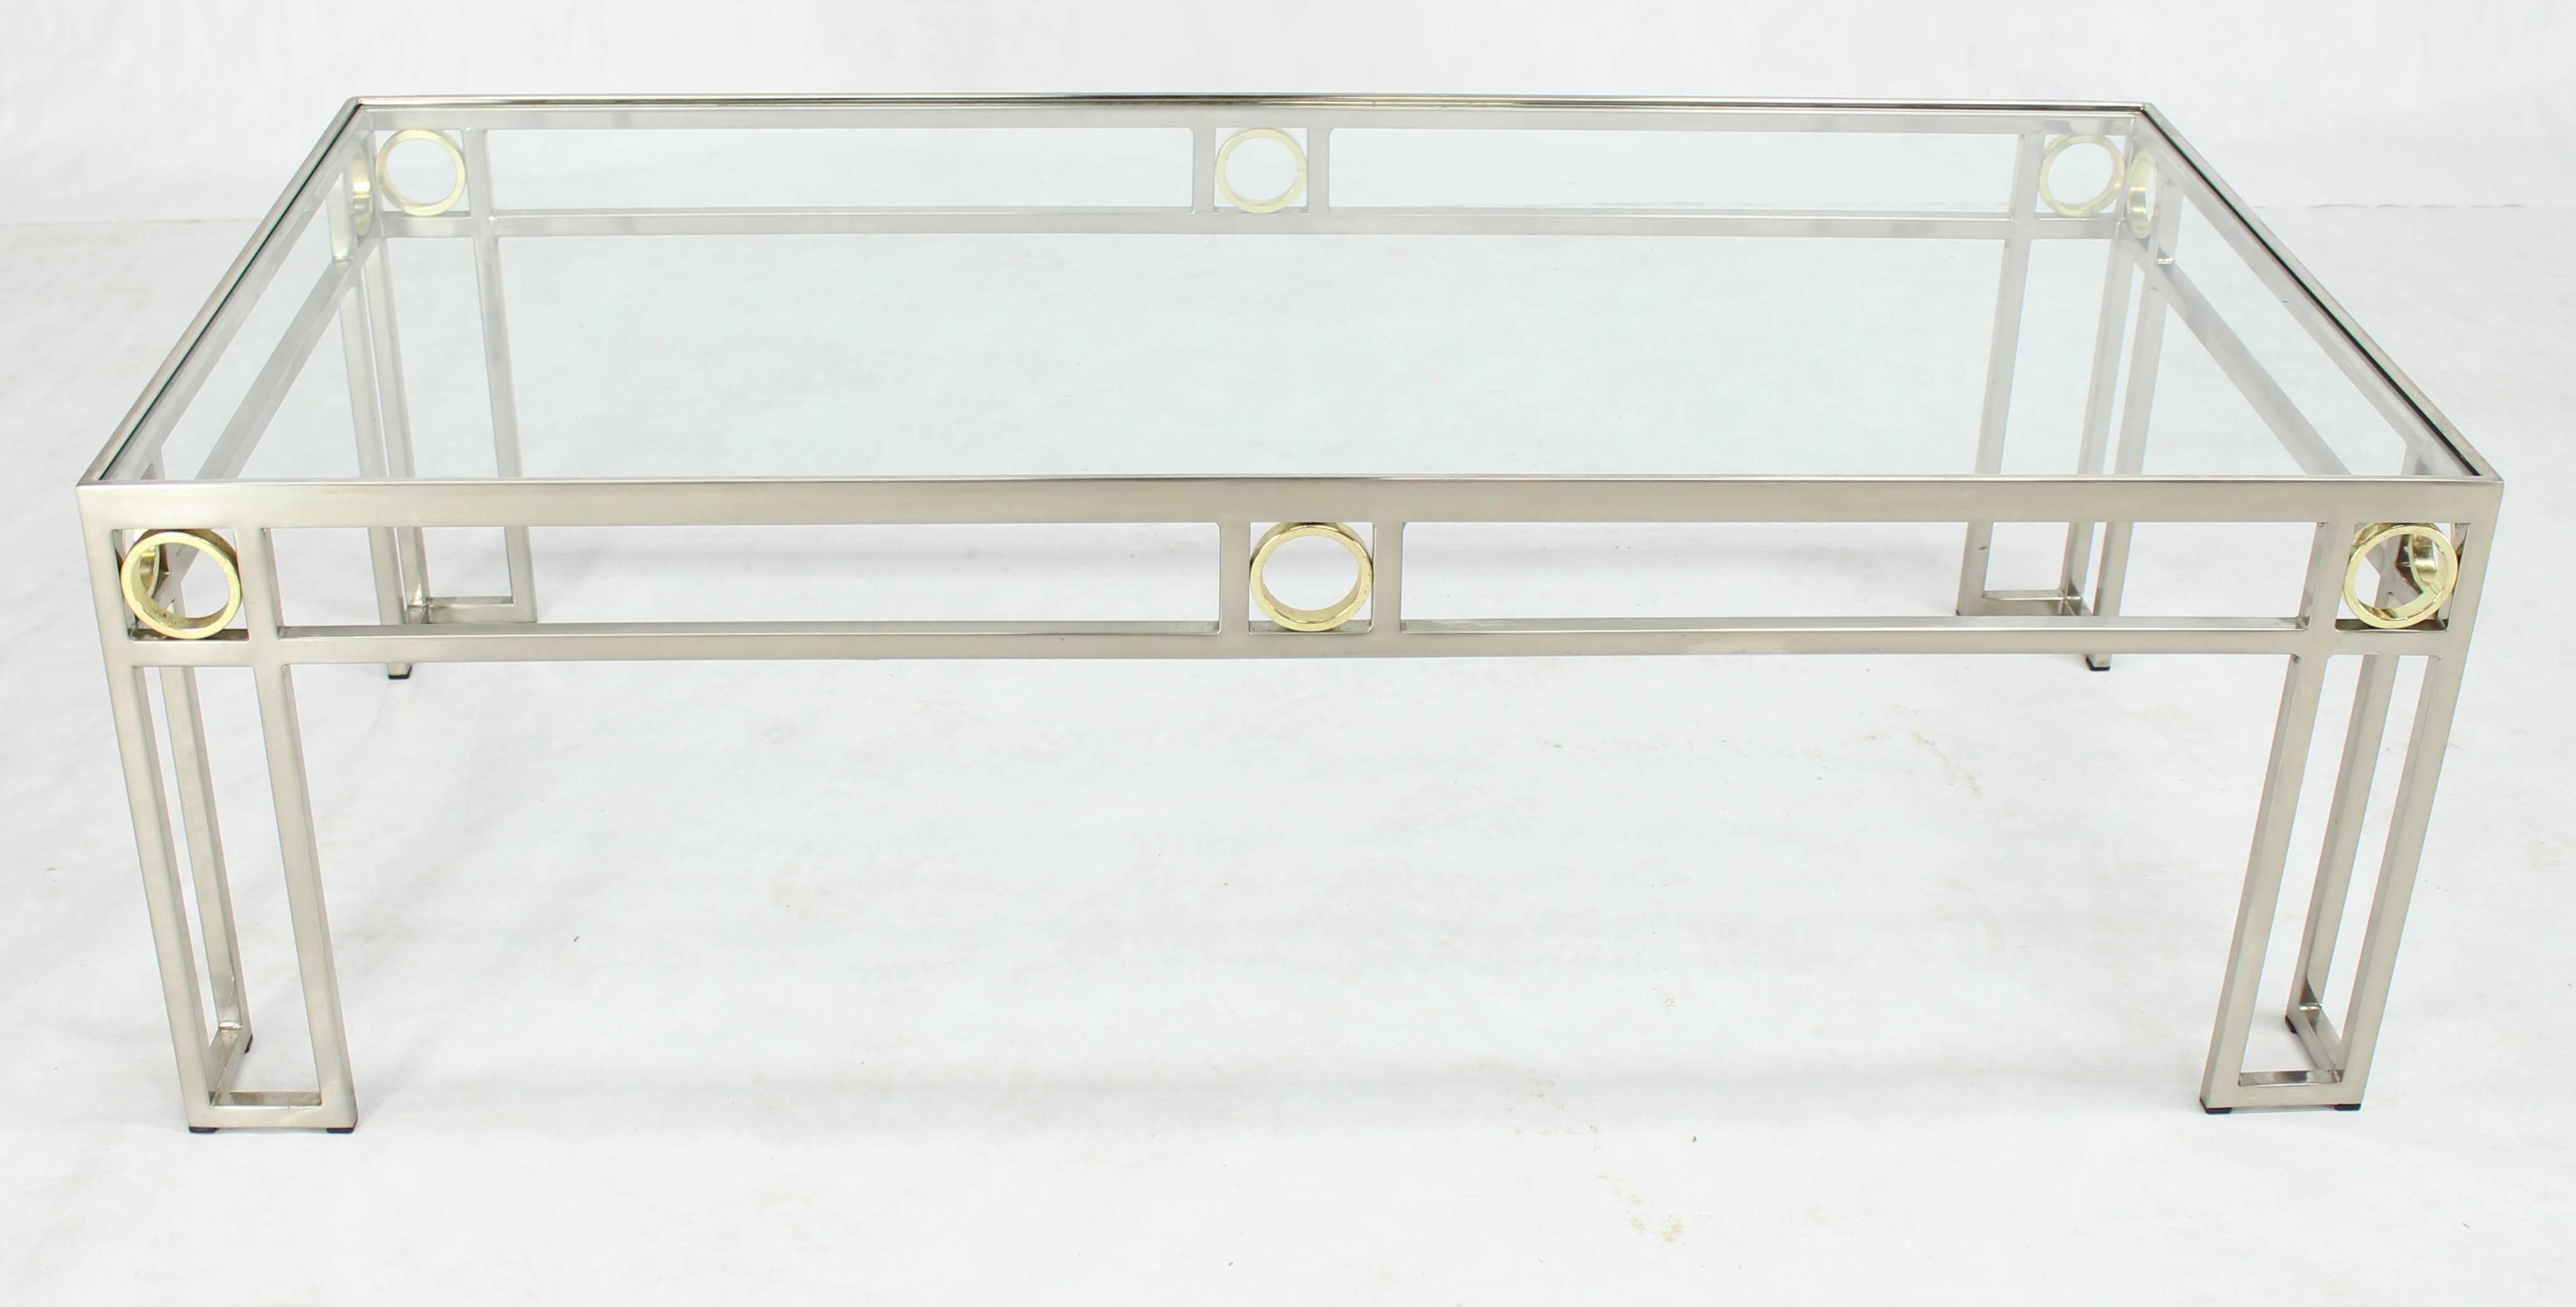 20th Century Brass Chrome Glass Rectangular Coffee Table For Sale